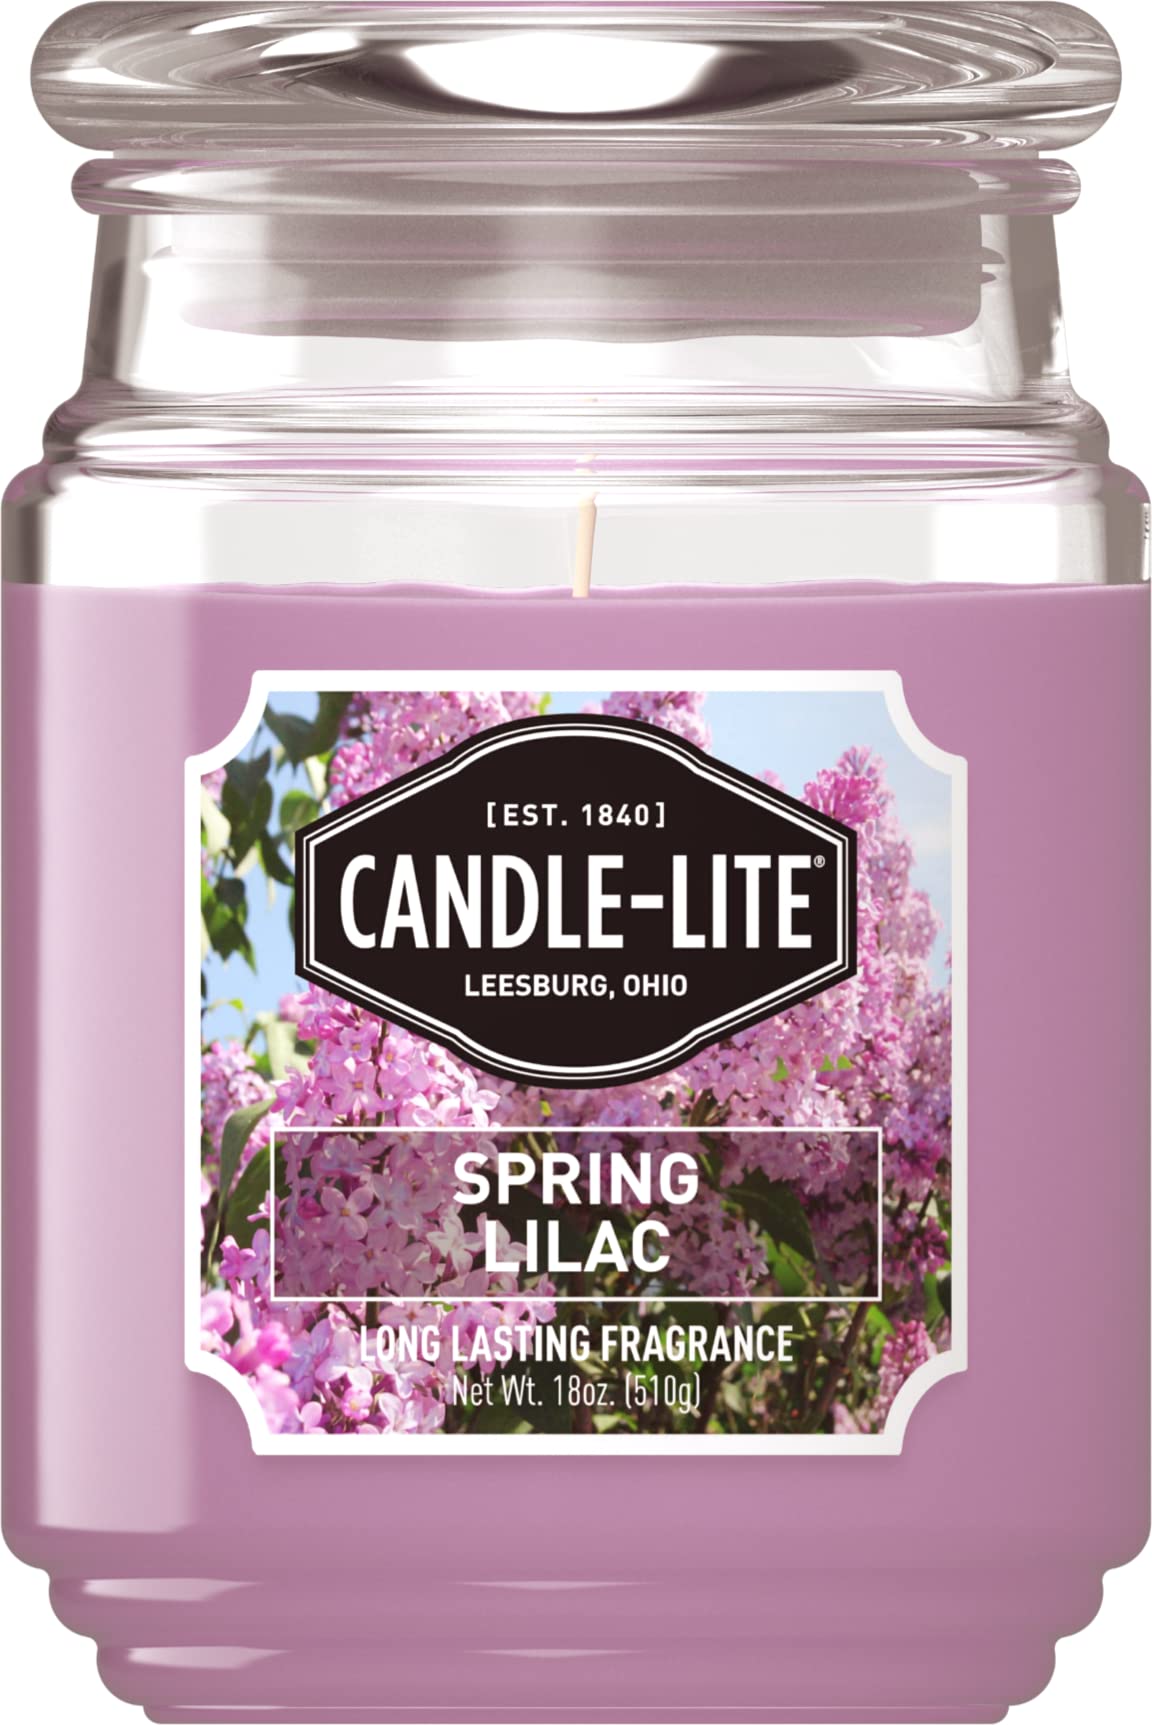 18-Oz Candle-Lite Scented Everyday Aromatherapy Candle (Spring Lilac) $4 w/ S&S + Free Shipping w/ Prime or on $35+